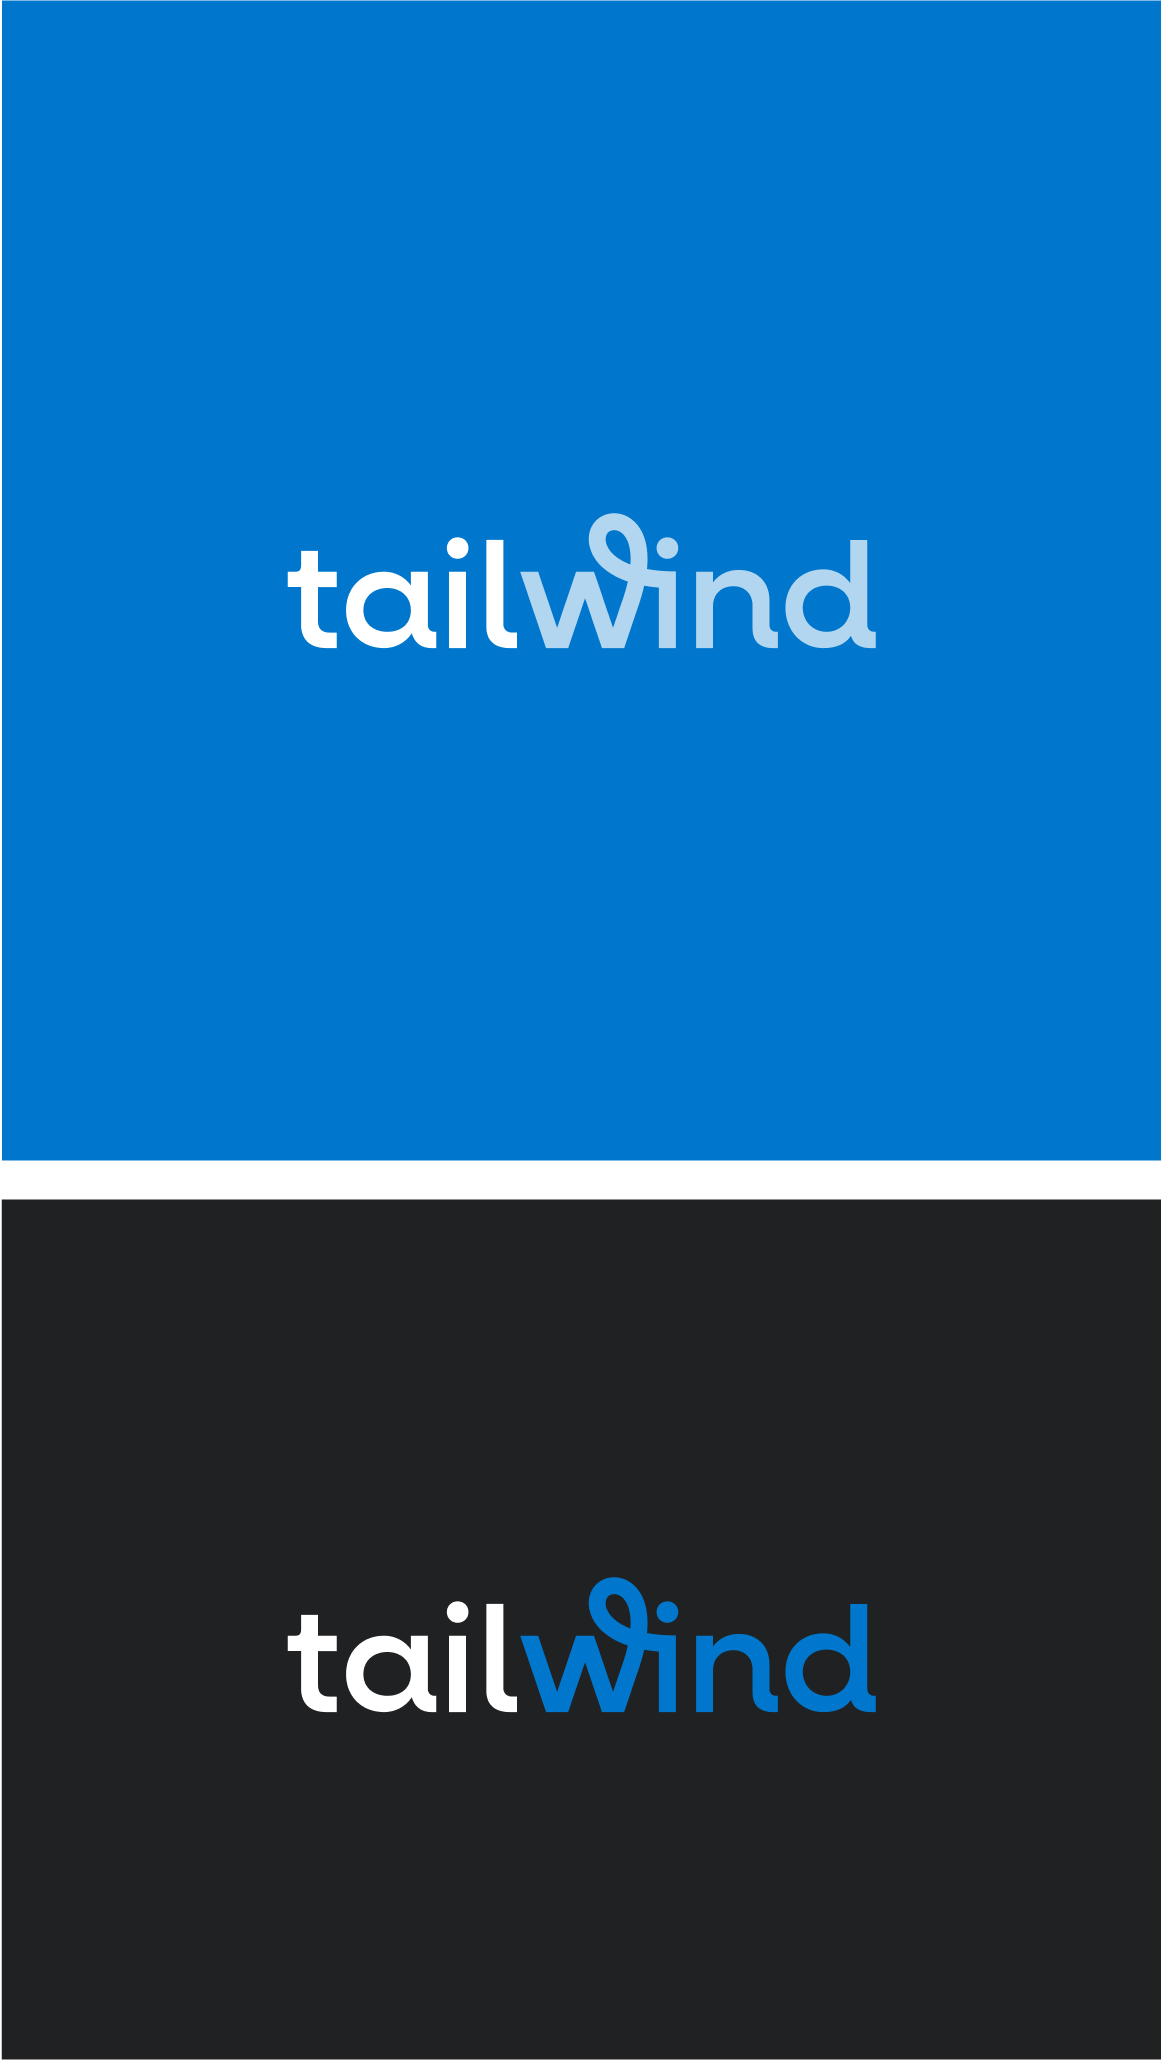 Tailwind trusts Bruno for its brand identity and website design.